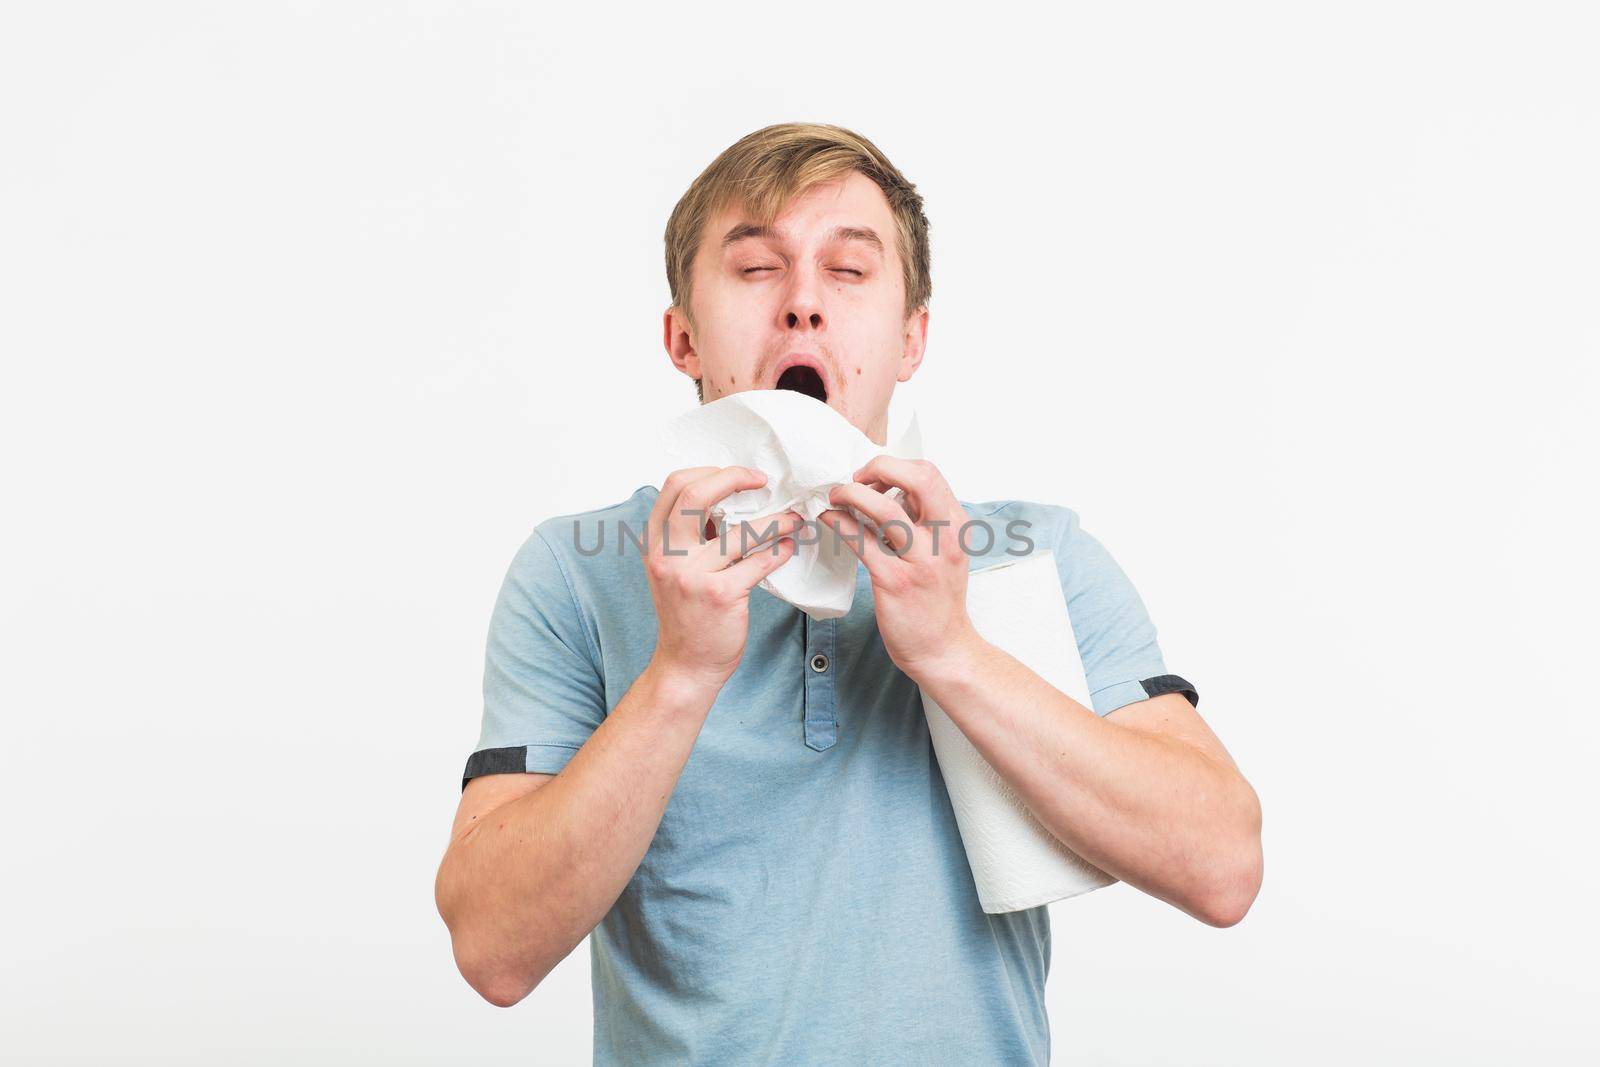 Man Sneezing Studio Portrait Concept. Young man with handkerchief. Sick guy isolated has runny nose